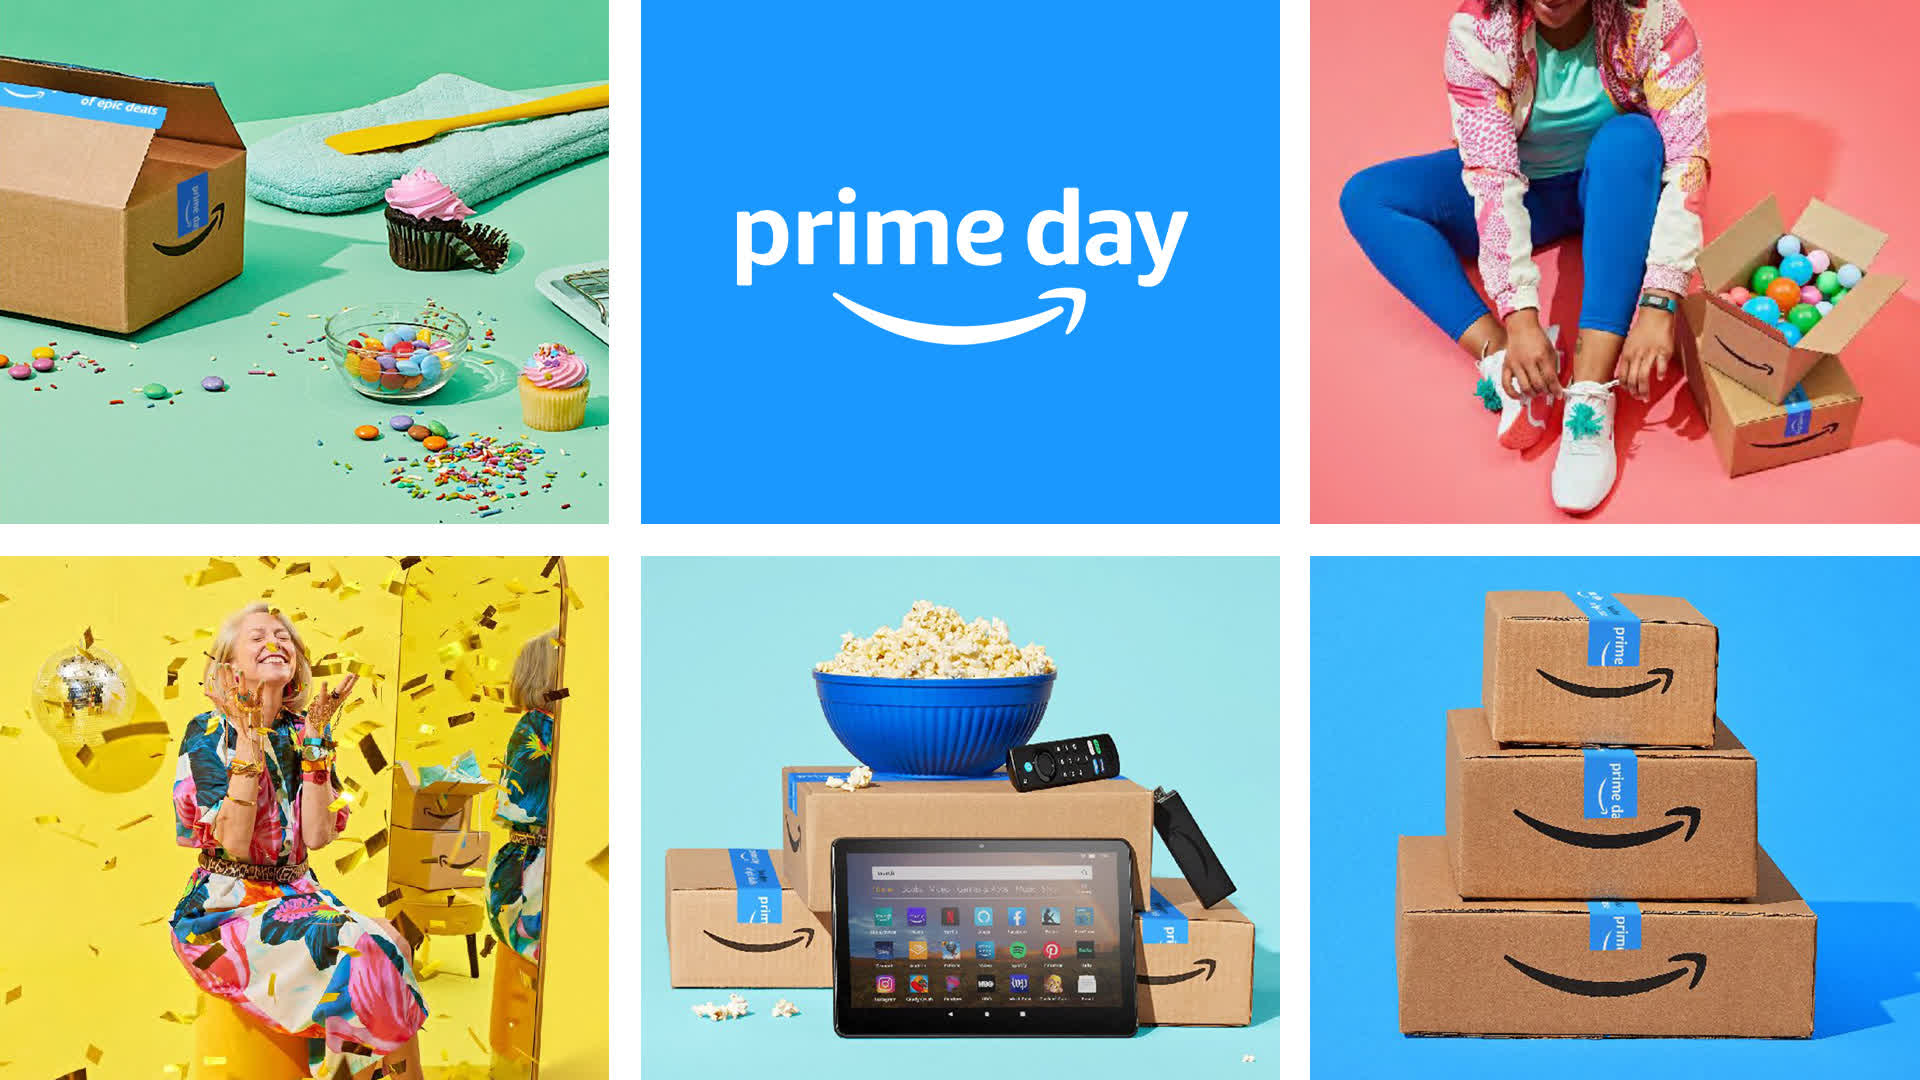 Amazon Prime Day kicks off July 12 with 48 hours of savings